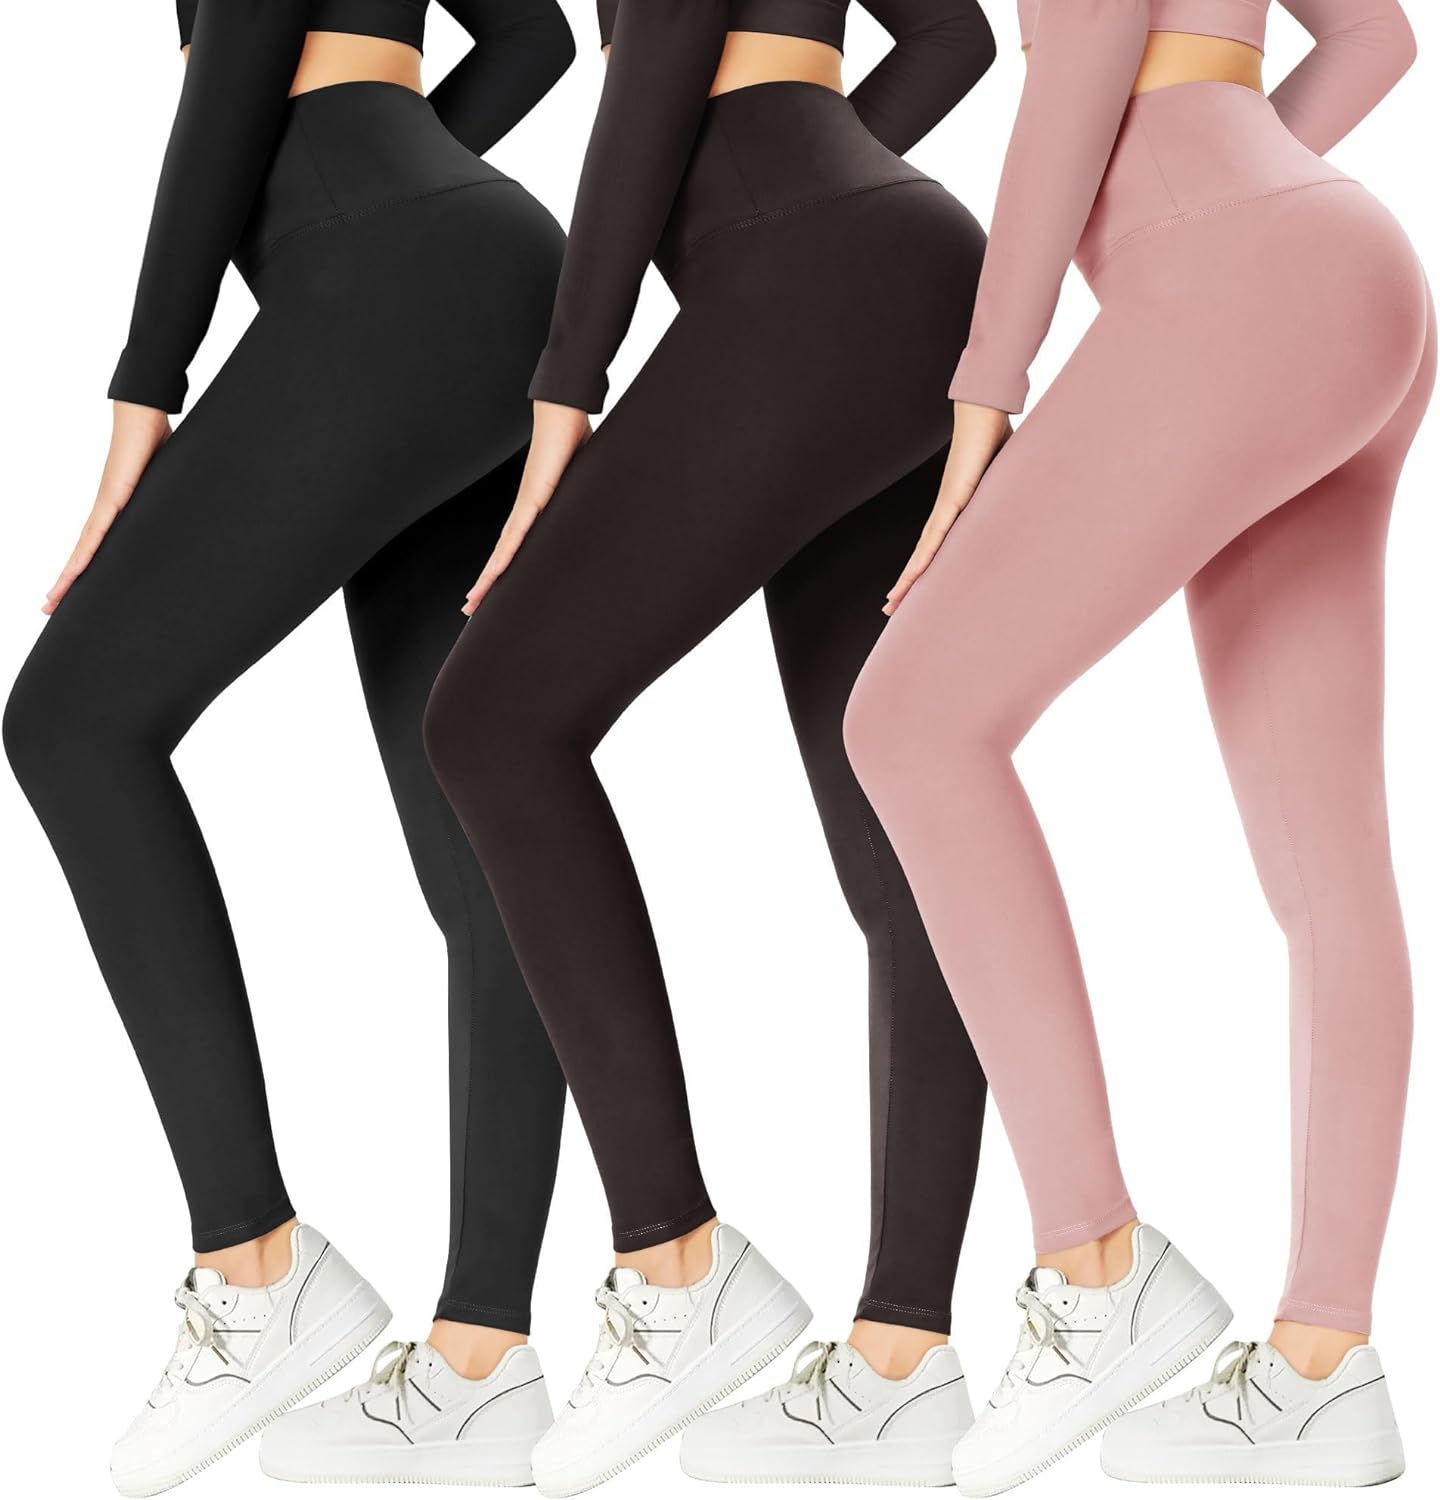 GAYHAY 3 Pack Plus Size High Waist Leggings - Stretchy Tummy Control Pants  for Women